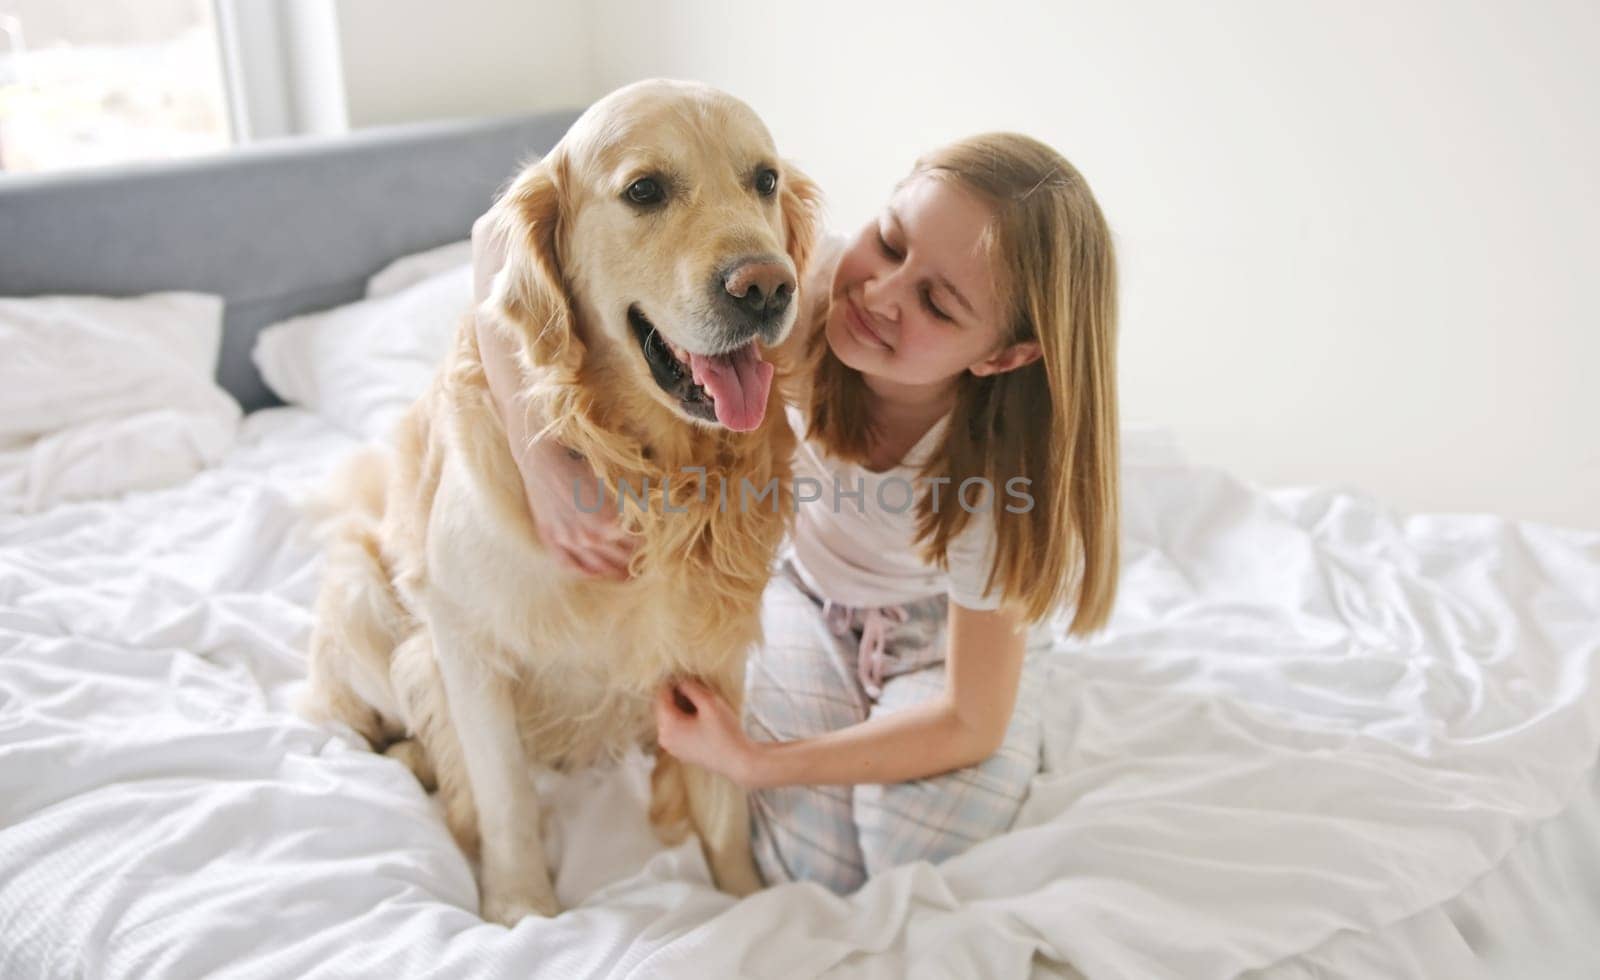 Cute Little Girl Hugging With Beautiful Golden Retriever Dog On Bed In The Morning by GekaSkr